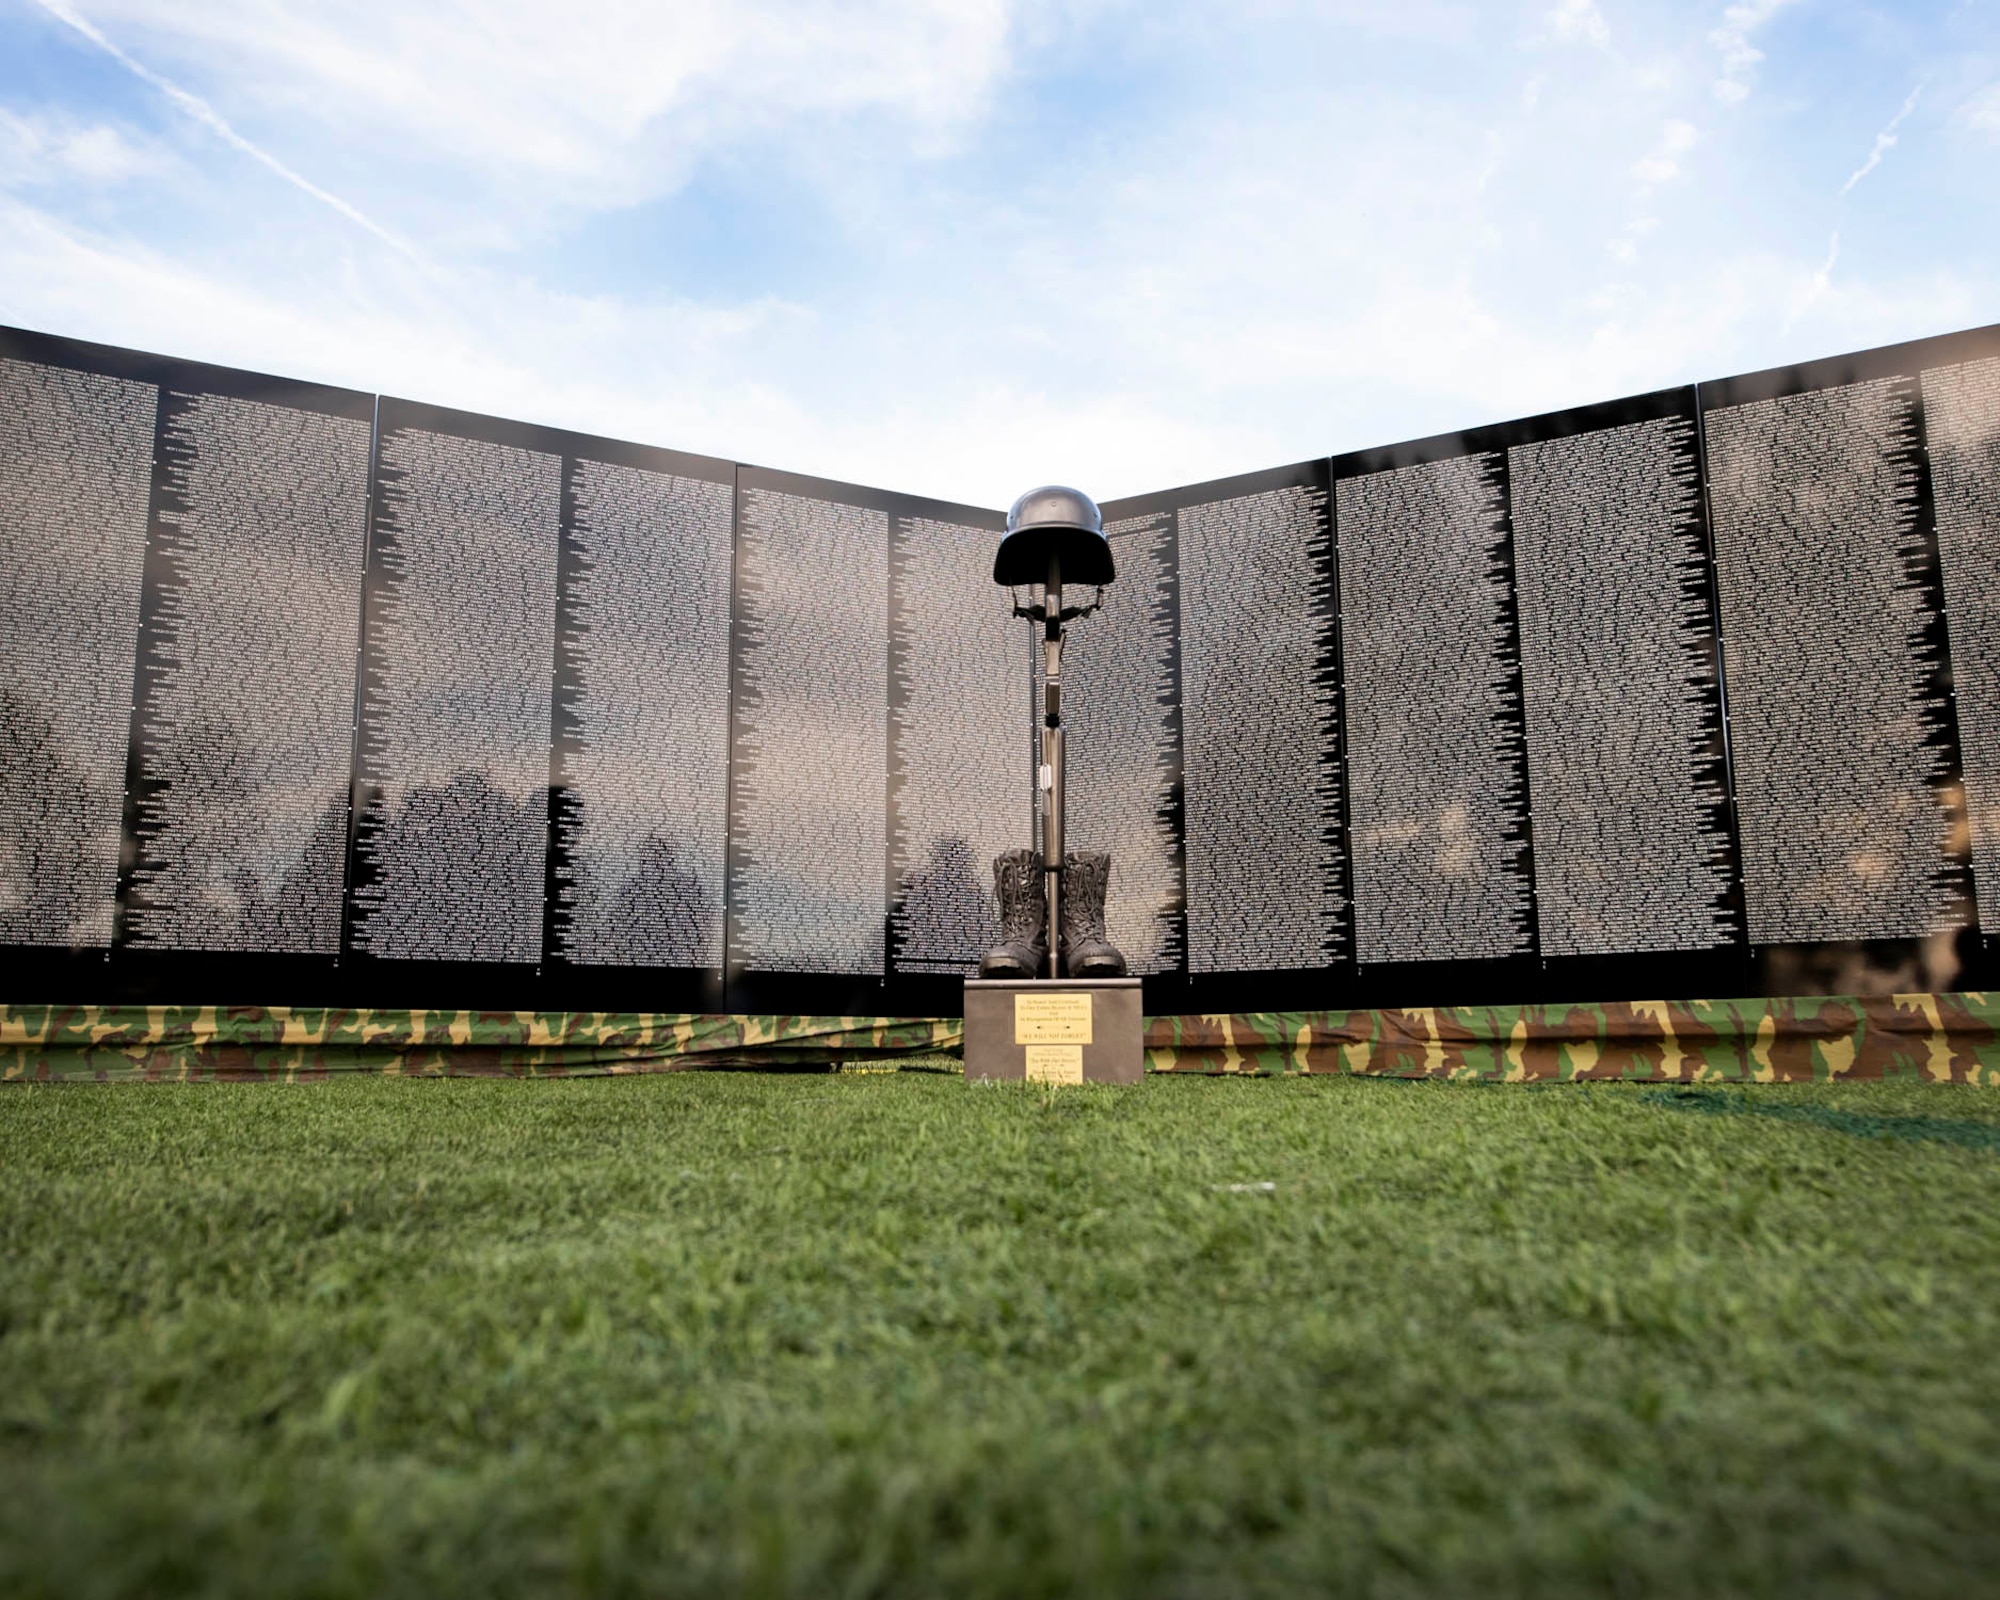 The sun sets on “The Moving Wall” following the opening ceremony for the display June 13, 2019 in Medical Lake, Wash. The Moving Wall is a half-size replica of the Vietnam Memorial that stands in Washington D.C. It travels throughout the country to bring the experience of visiting the memorial to those who may not have the opportunity to travel to the nation’s capital and will be in Medical Lake June 13-17 at the 200 block of South Prentis St. (U.S. Air National Guard photo by Staff Sgt. Rose M. Lust/Released)